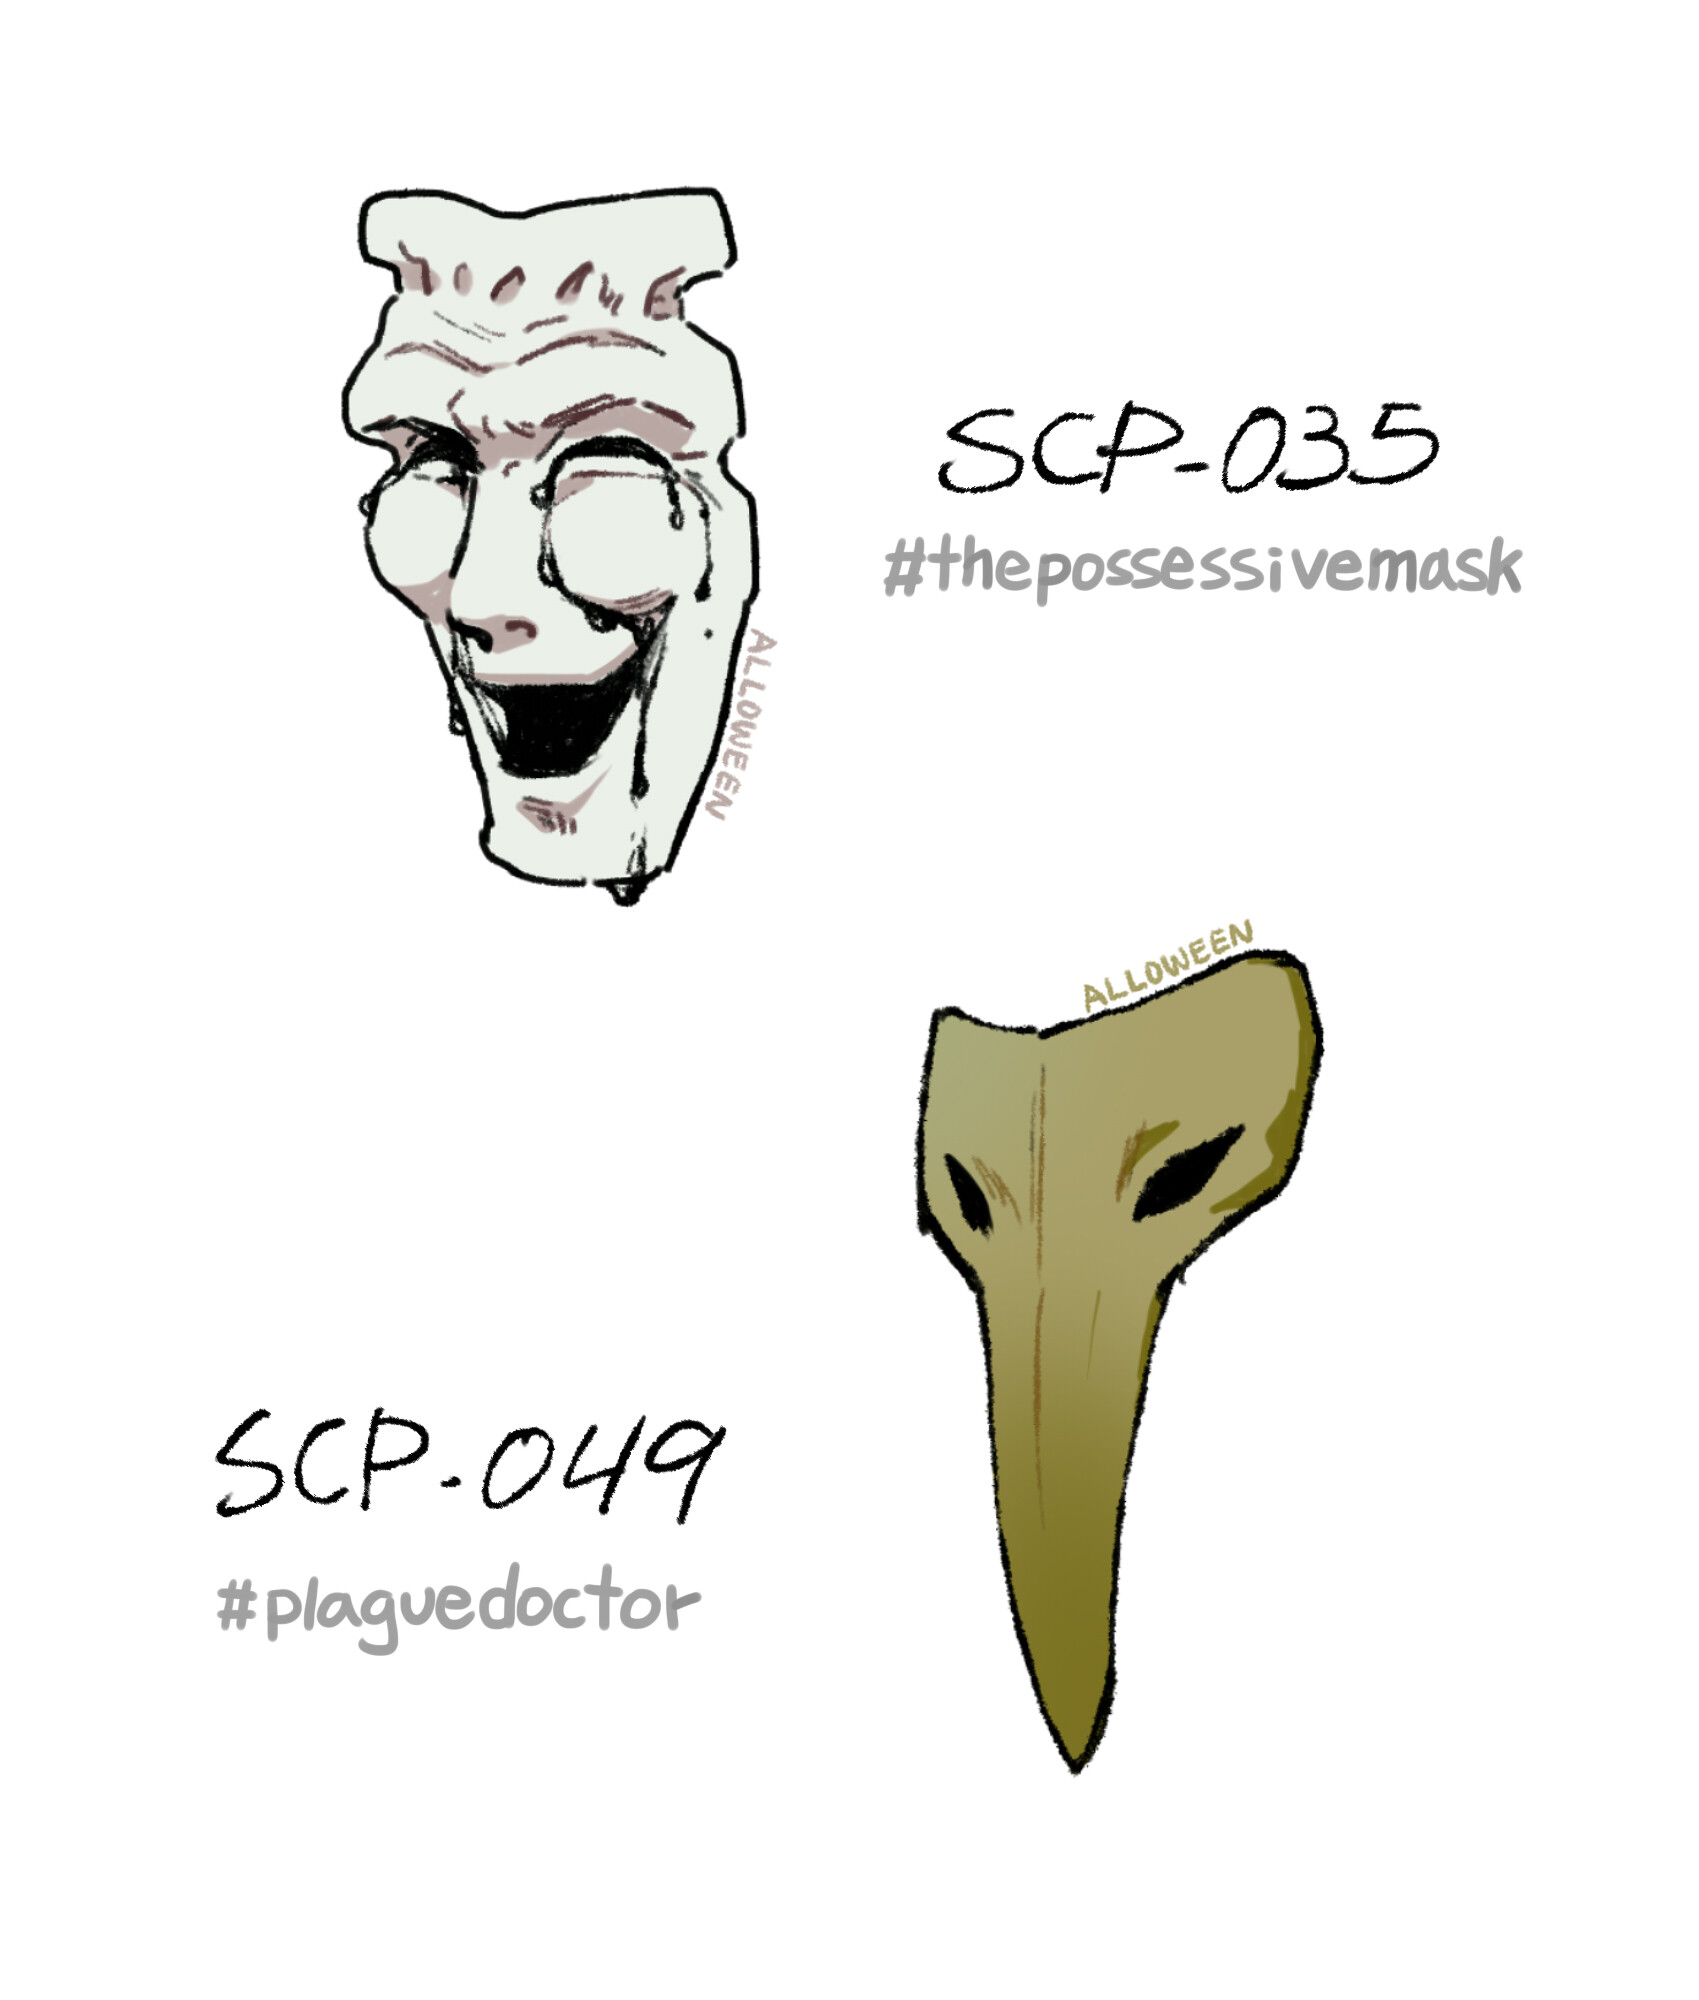 Scp 035 x Scp 049 New years